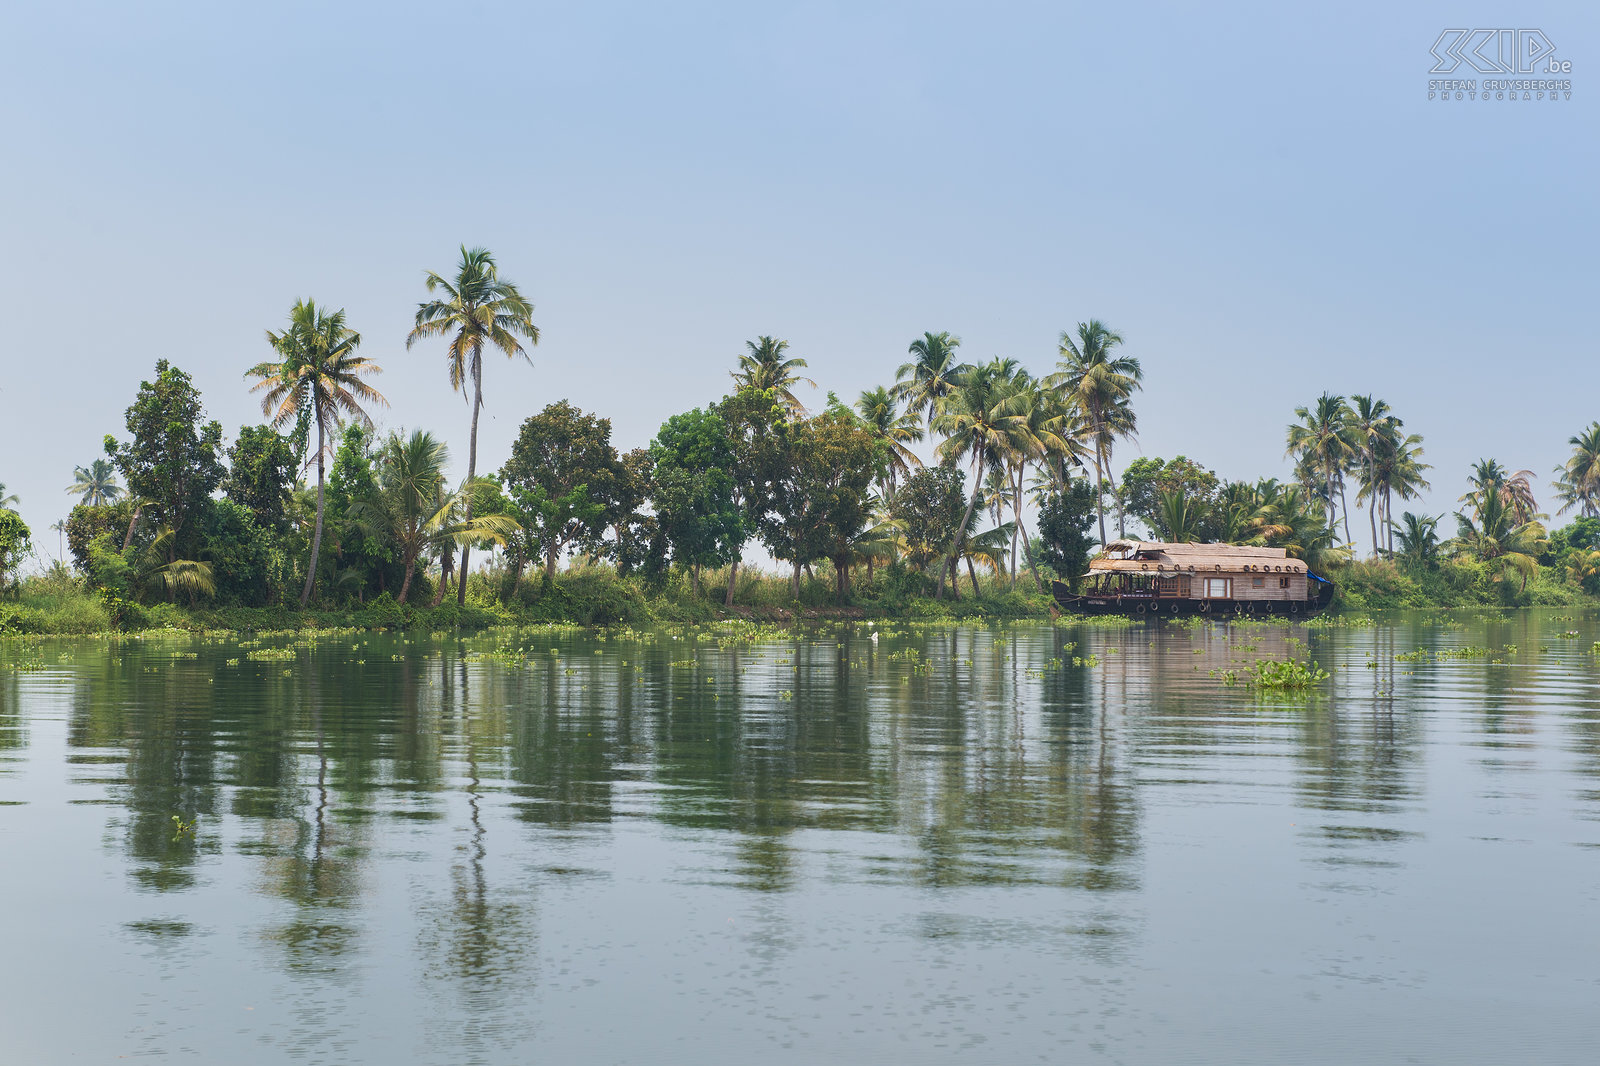 Backwaters Kerala - Houseboat Then we started a tour with a housboat on the Kerala backwaters. The Kerala backwaters are a chain of brackish lagoons, lakes and canals lying parallel to the Malabar Coast. It is a tropical location with many palm trees, rice fields, colourful birds, small villages, … The tourist houseboats look like the traditional kettuvallams which were used to transport the rice and grains to the harbors.  Stefan Cruysberghs